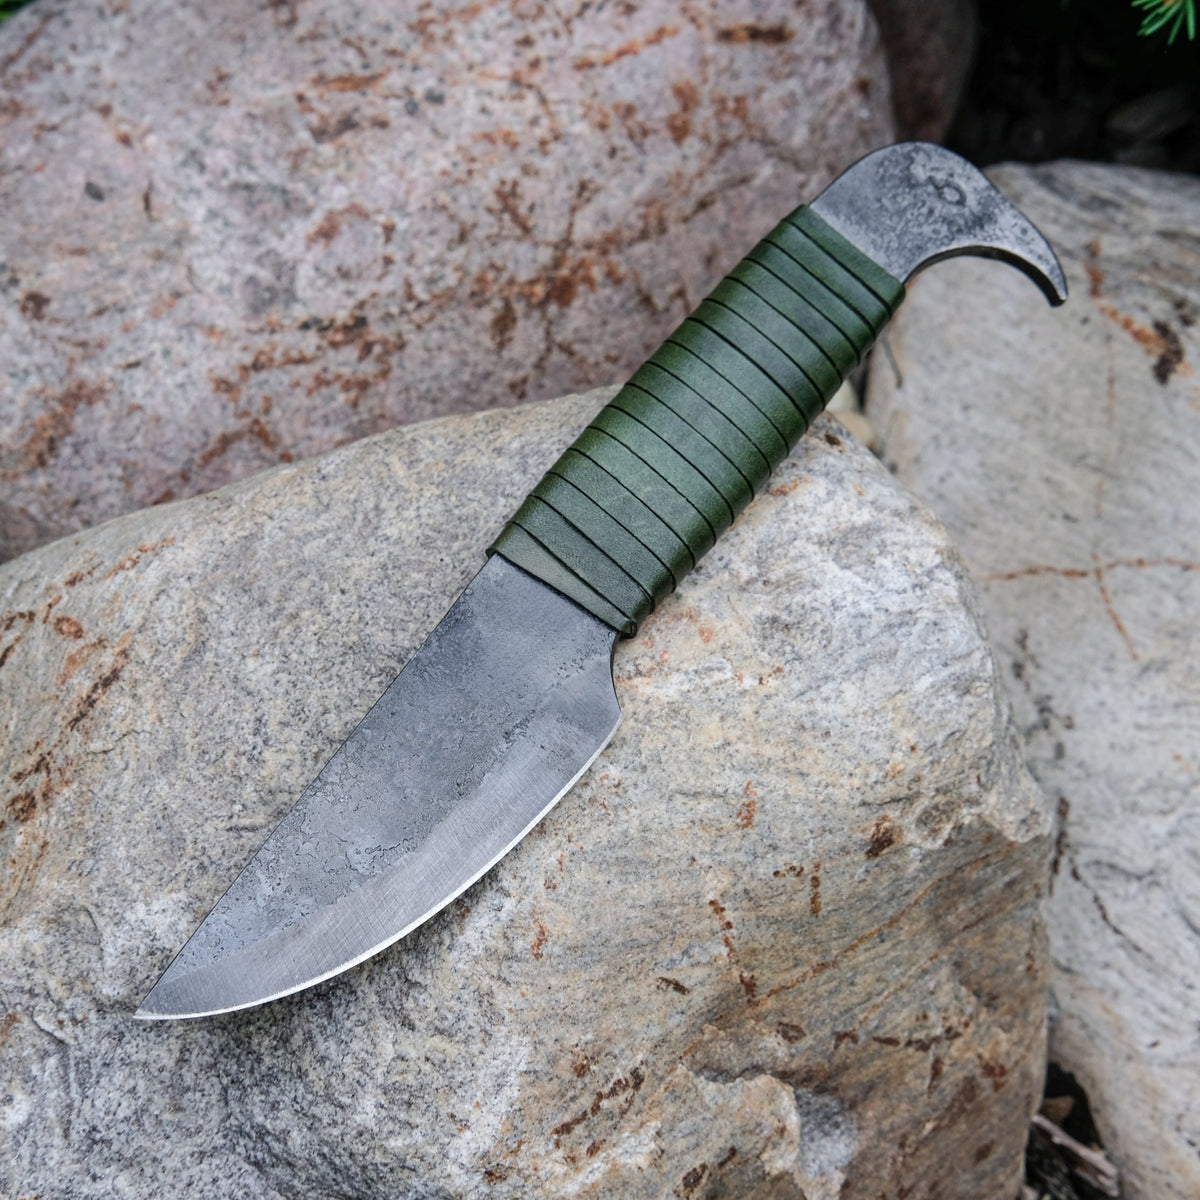 Toferner Bird Head Knife - Hand forged Knives